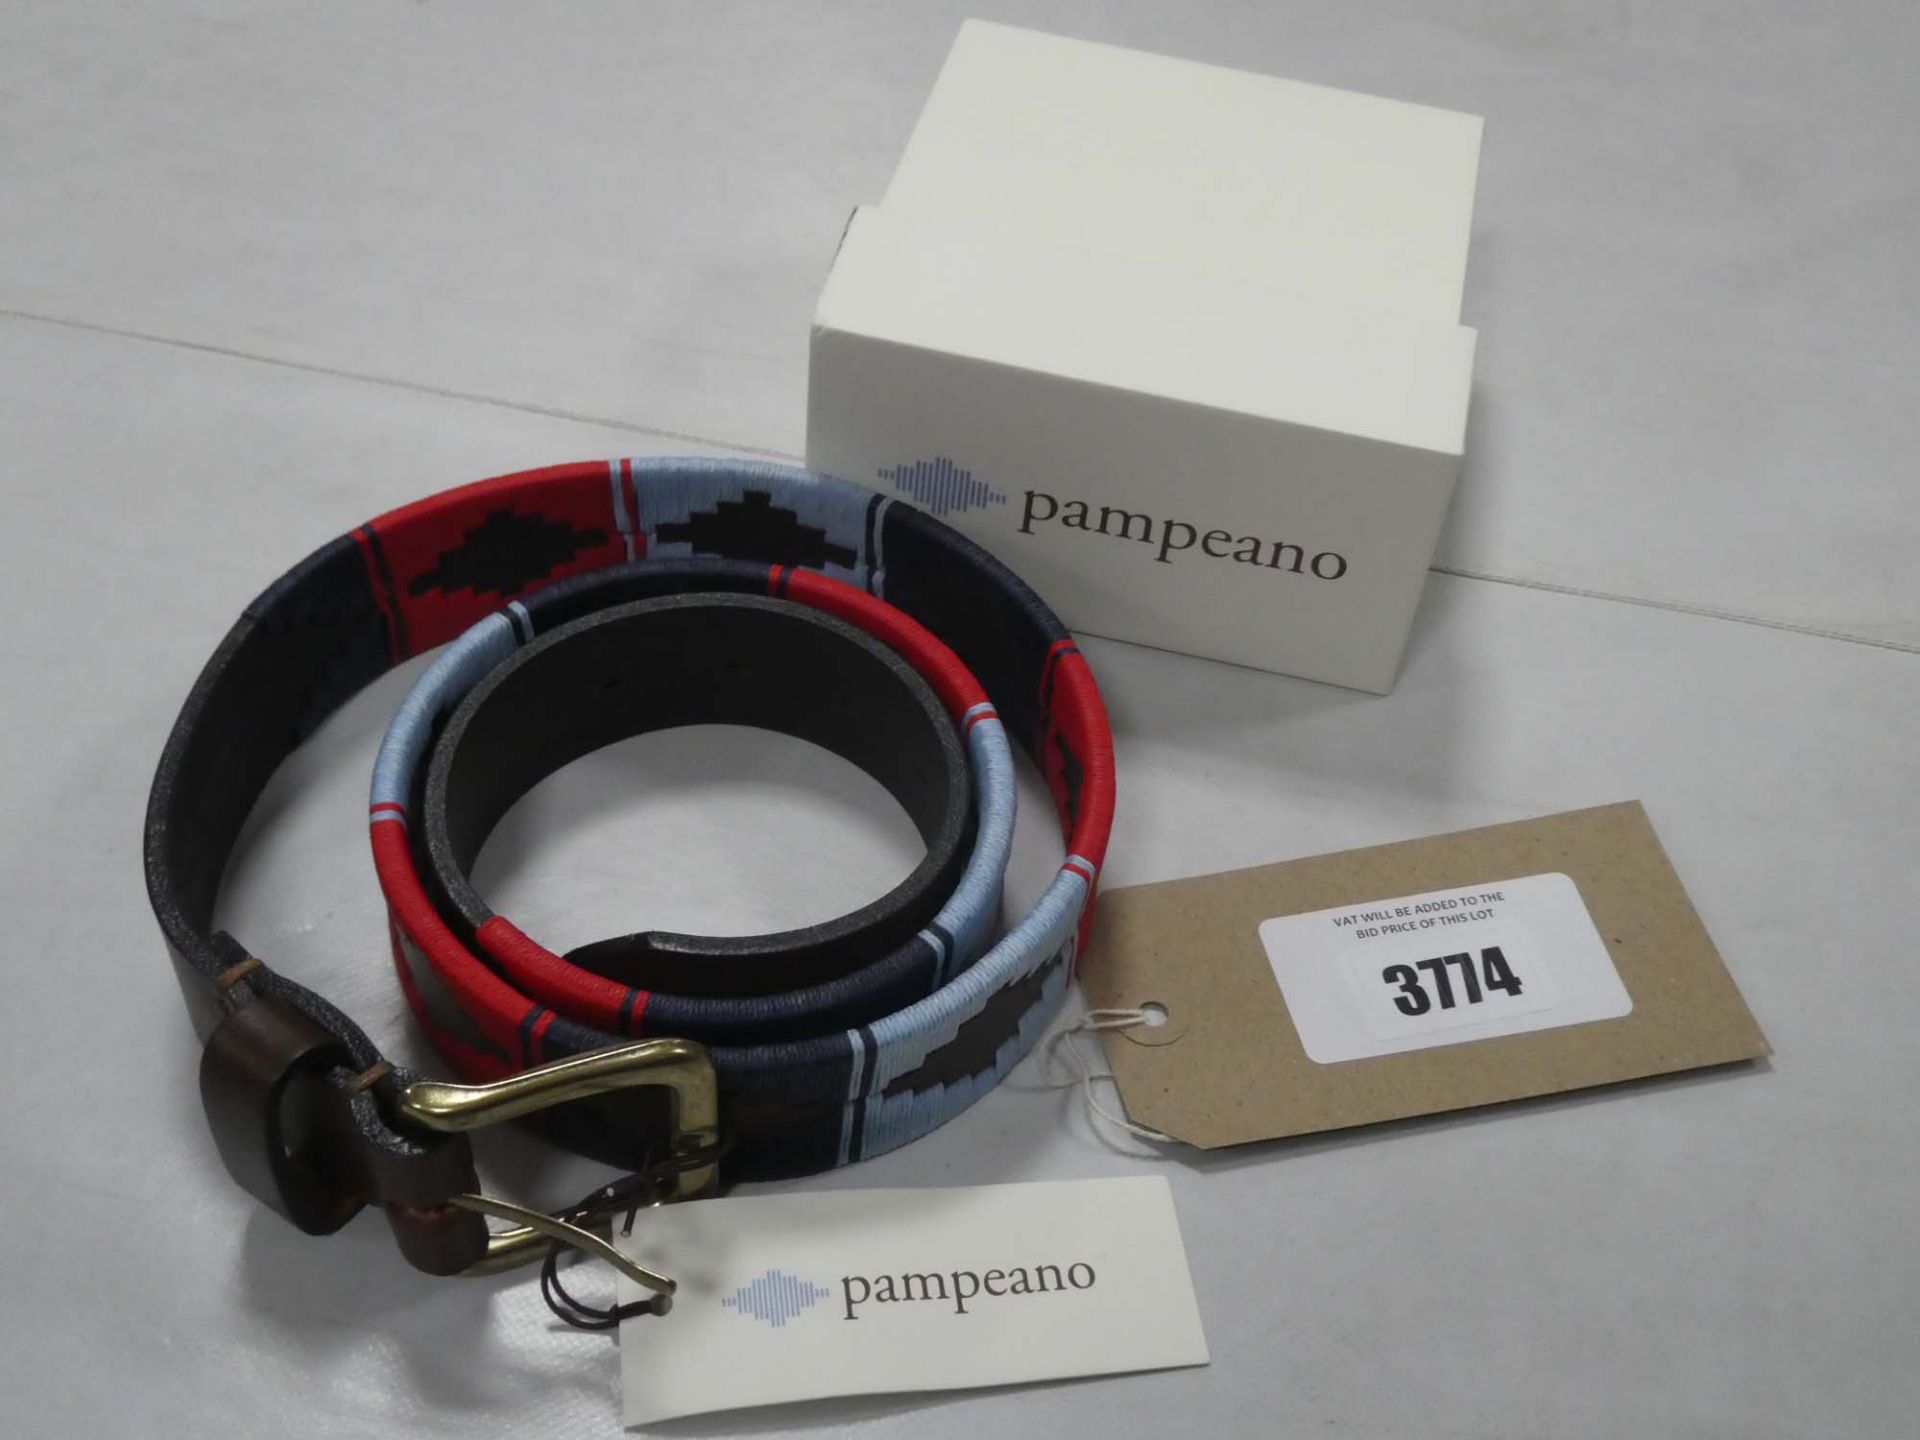 Pampeano genuine leather belt in red / blue size 95 with box